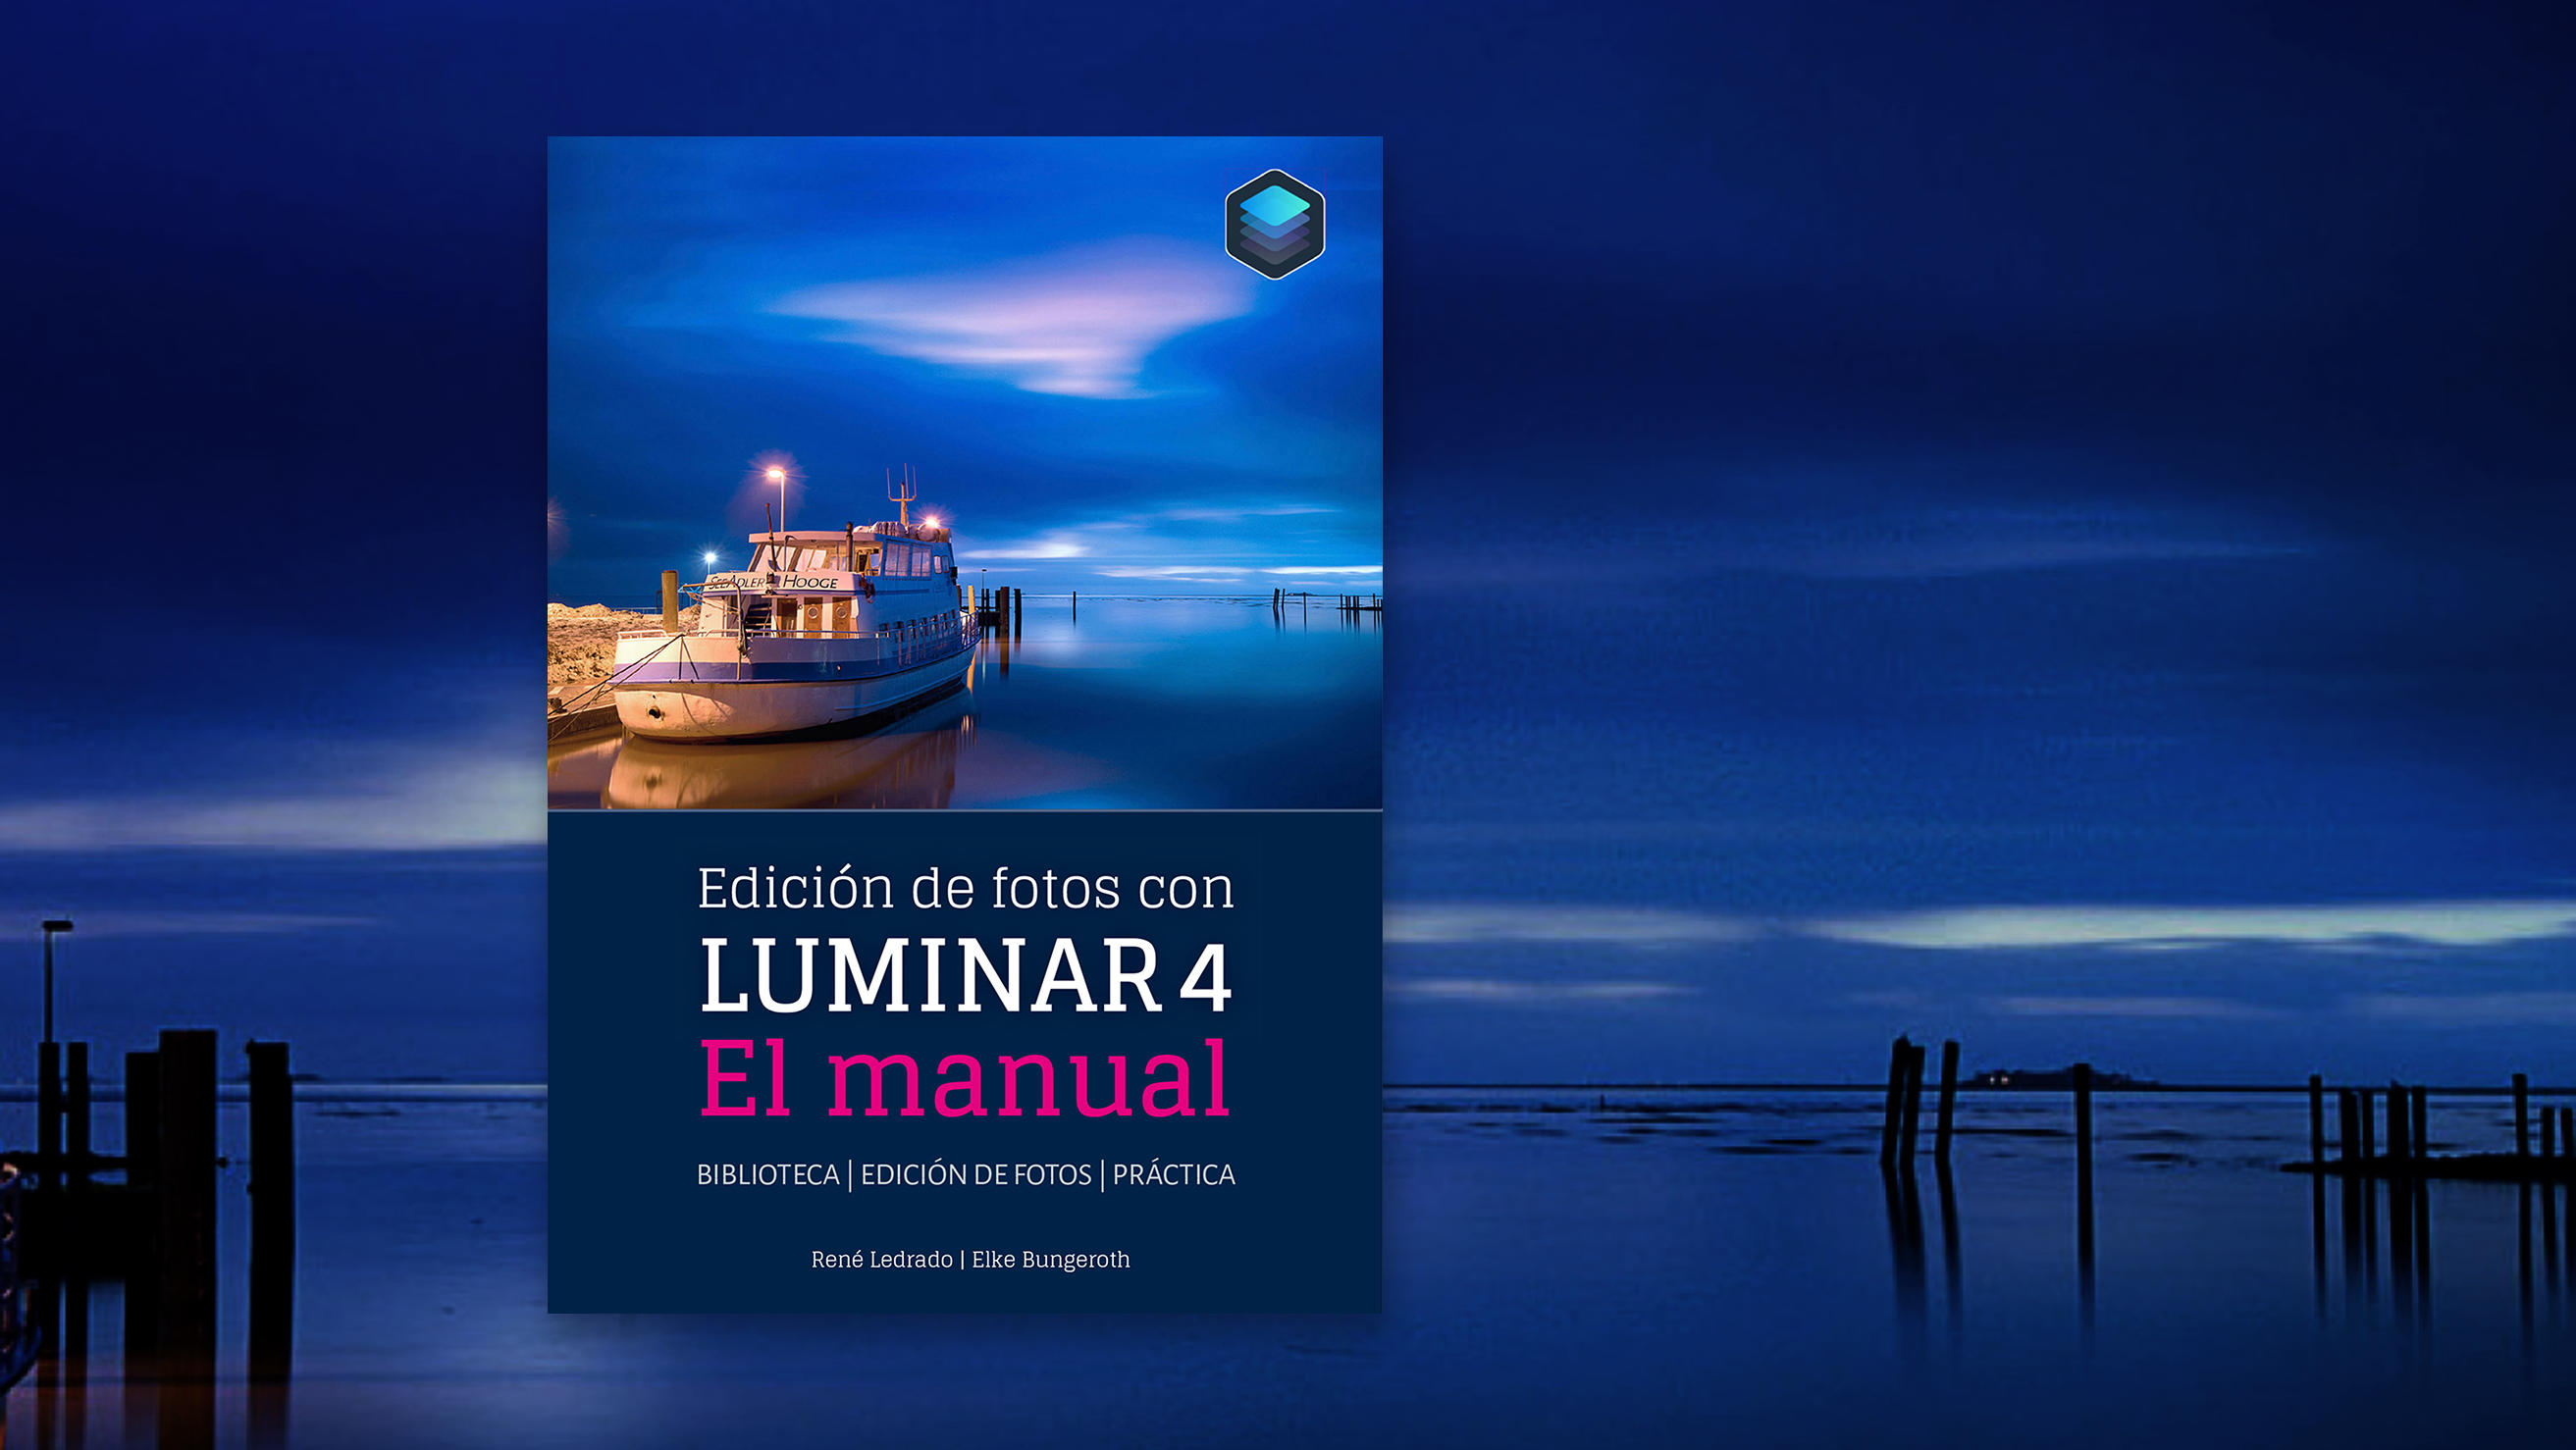 Luminar Neo 1.12.0.11756 instal the new version for iphone